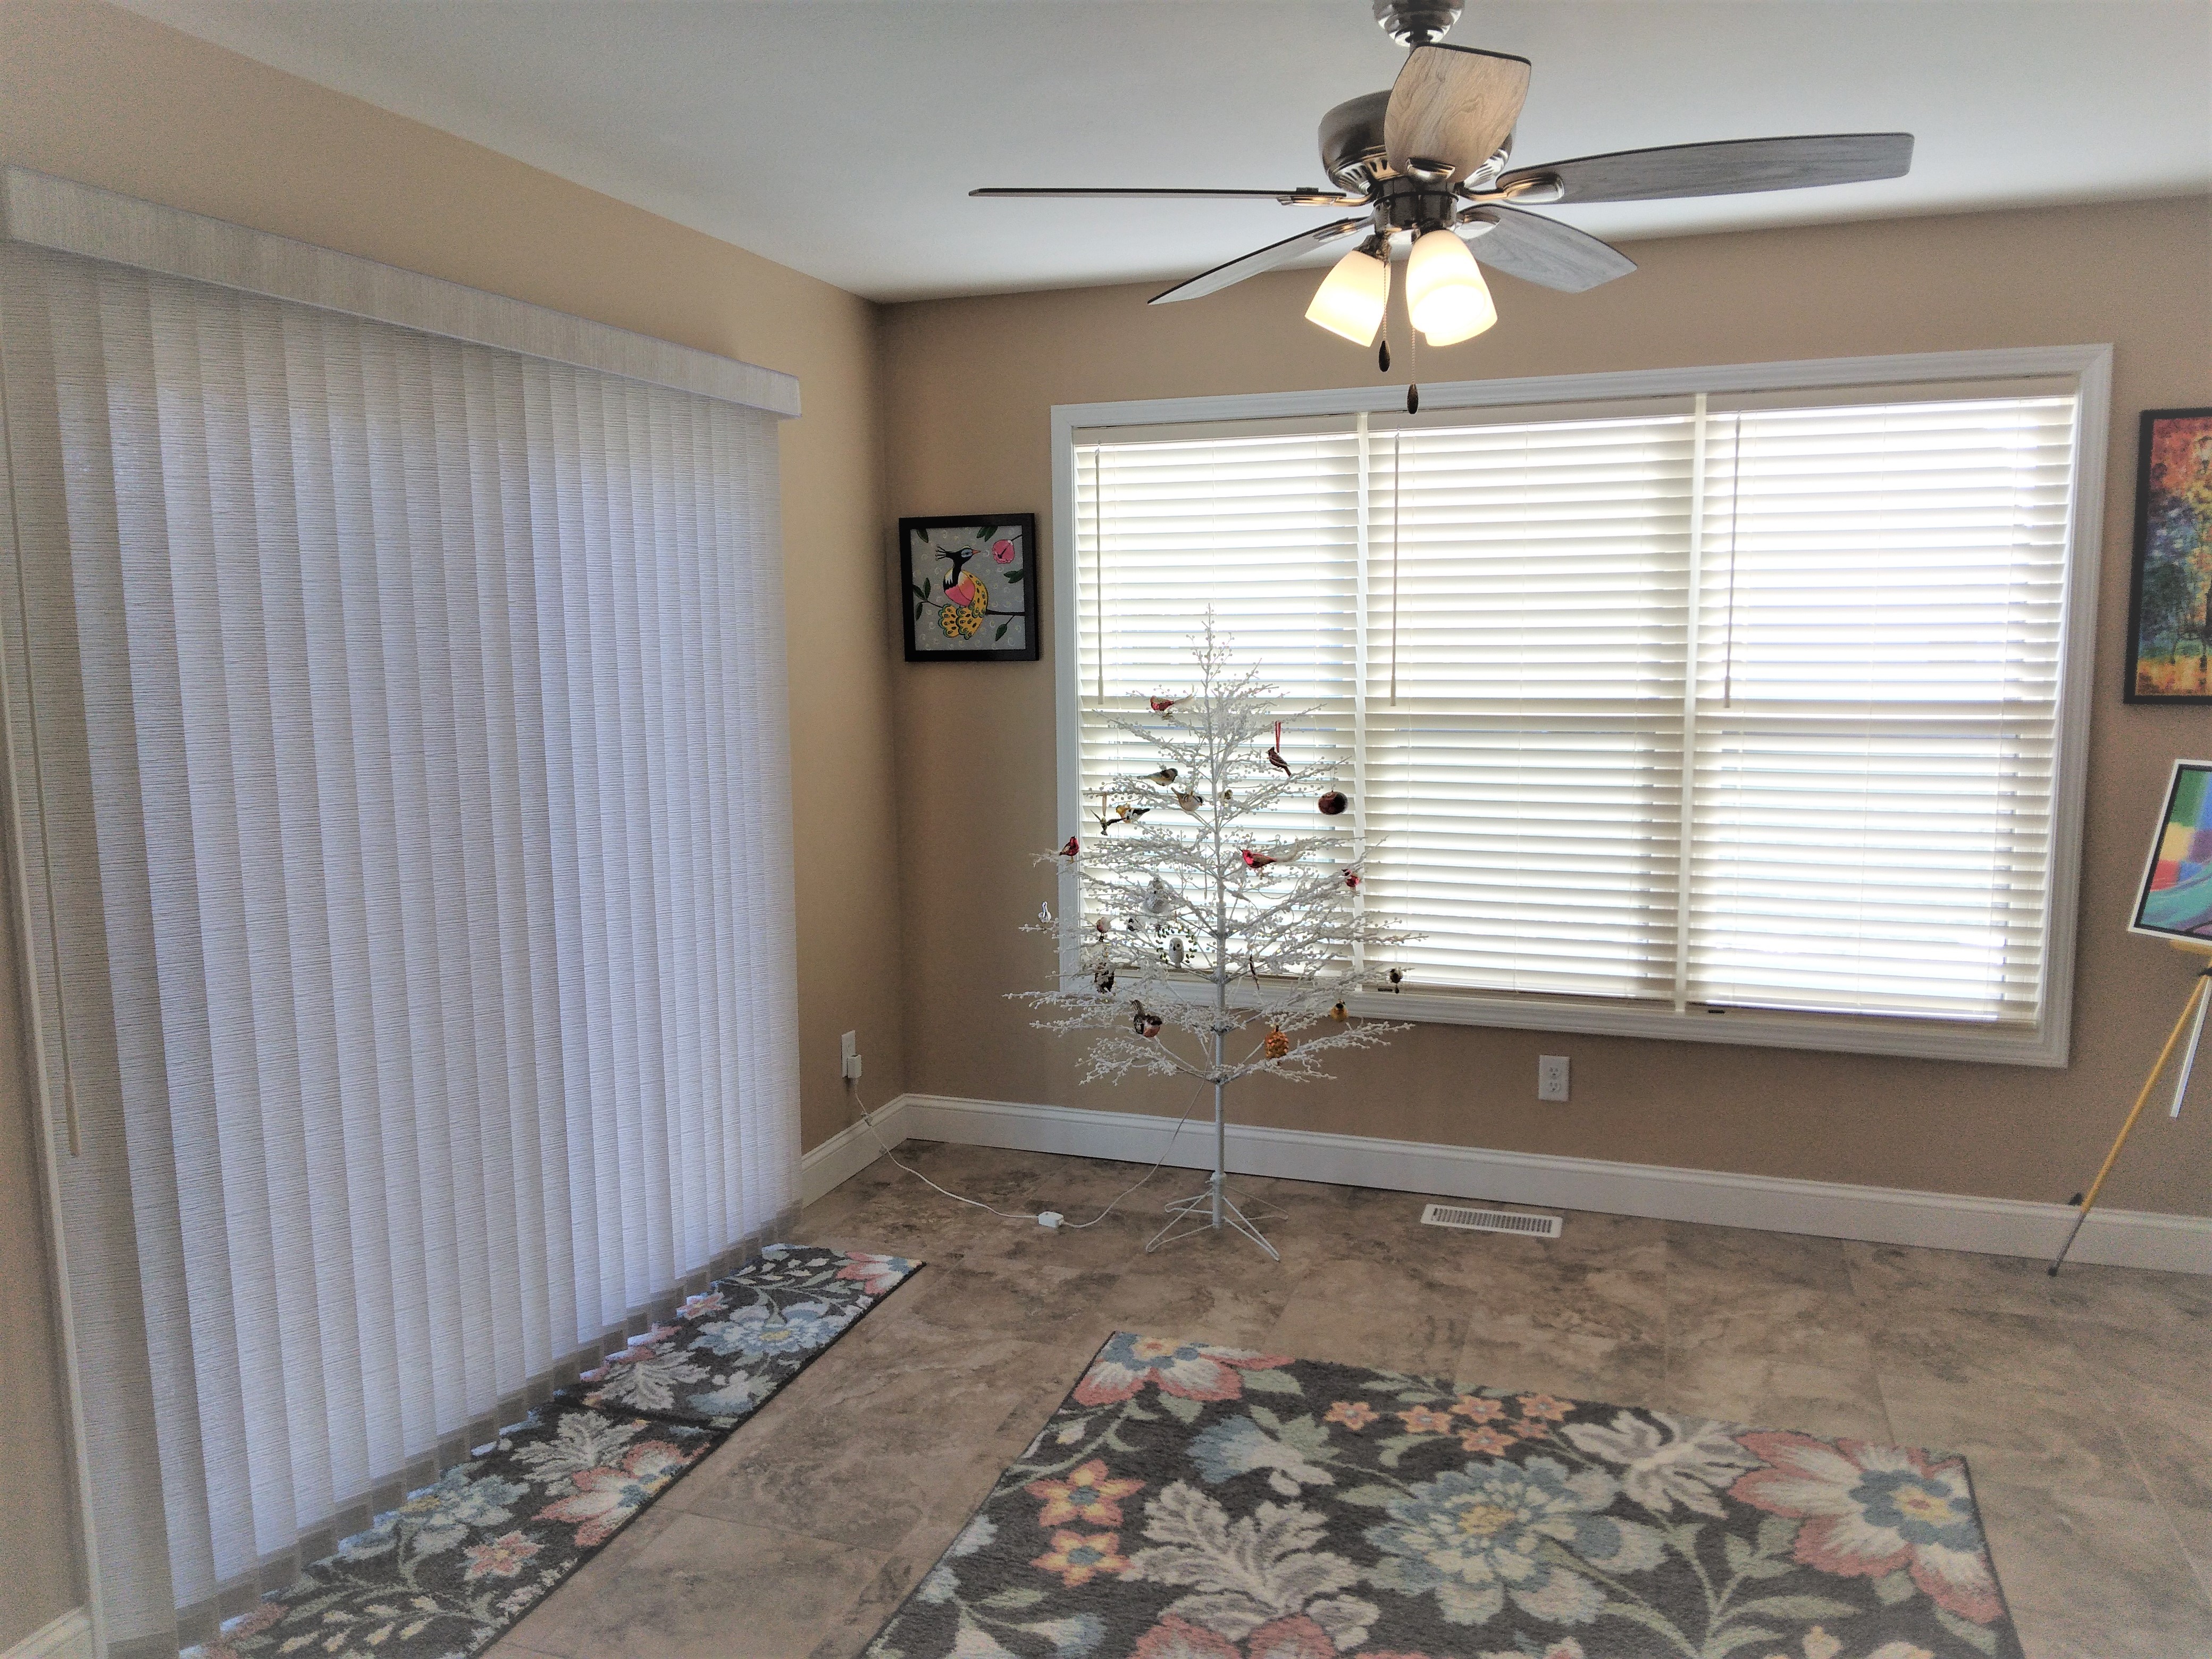 The faux wood blinds on the windows and the vertical blinds on the sliding door create a perfect look for the sunroom in this beautiful Springfield Illinois home.  BudgetBlinds  Blinds  VerticalBlinds  WindowCoverings  SpringfieldIllinois  Springfield